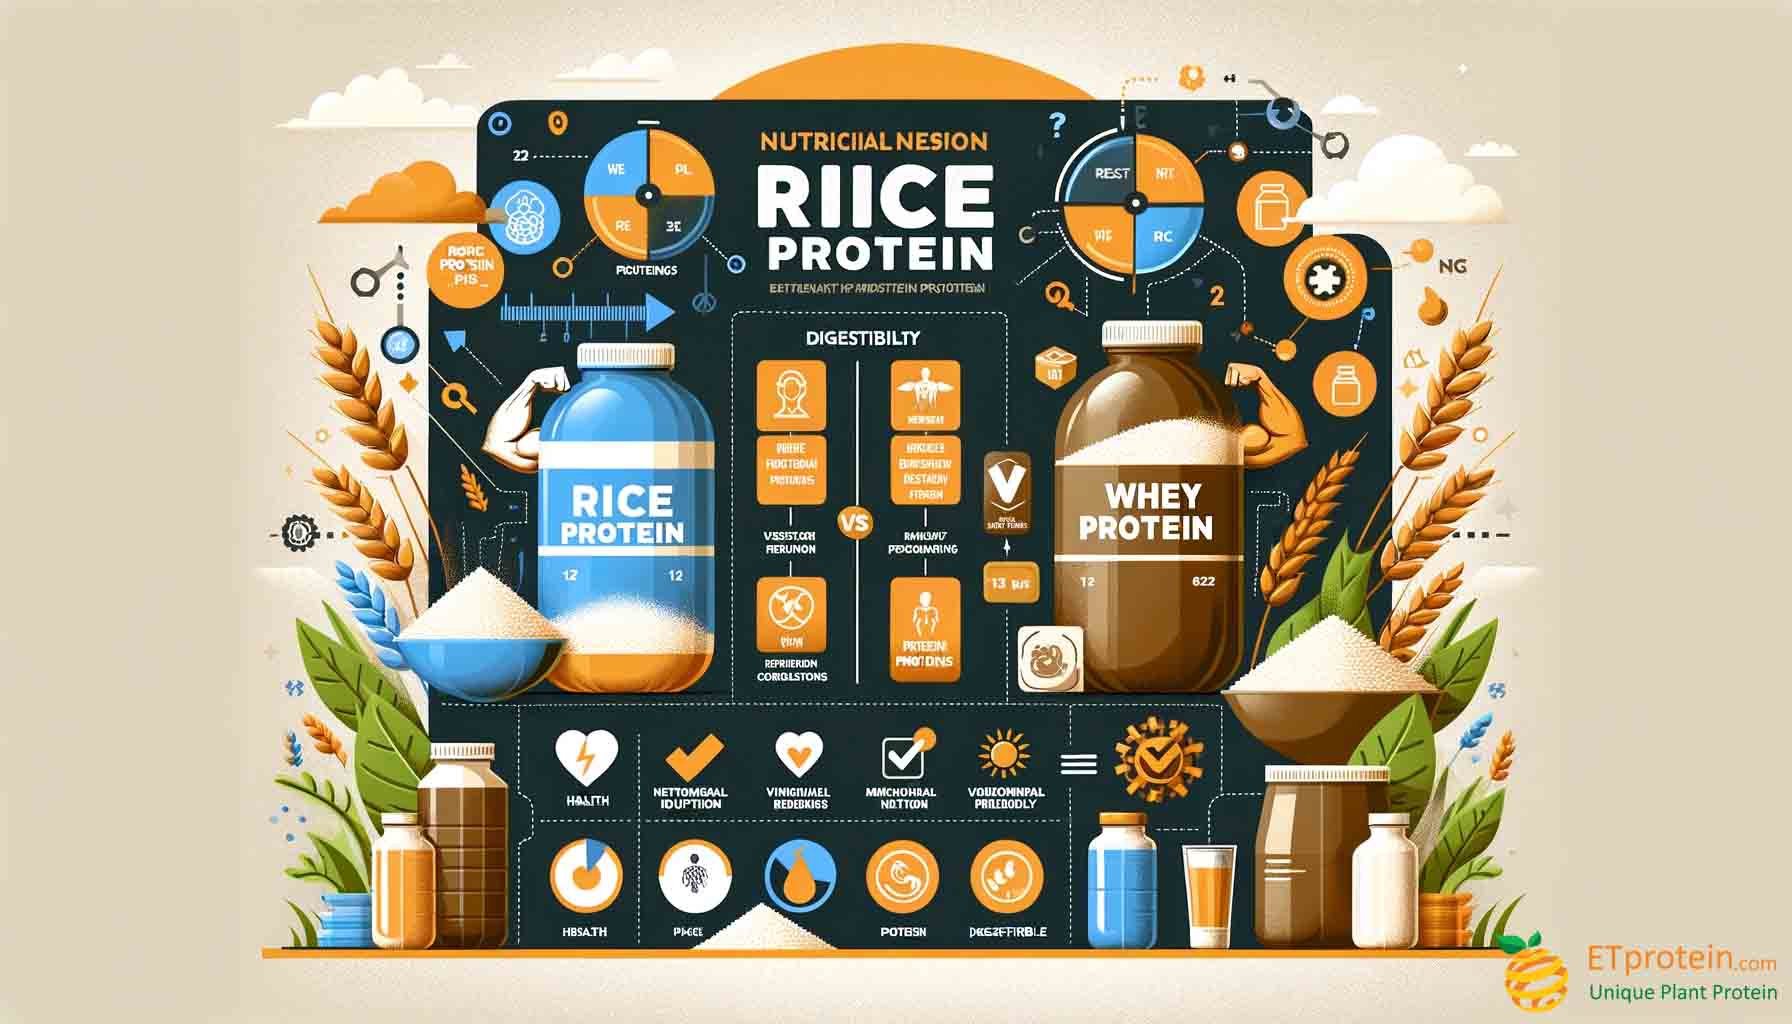 Rice Protein vs Whey Protein: A Comprehensive Comparison. Comprehensive comparison of rice and whey proteins, covering nutrition, health benefits, digestibility, dietary suitability, and environmental impact